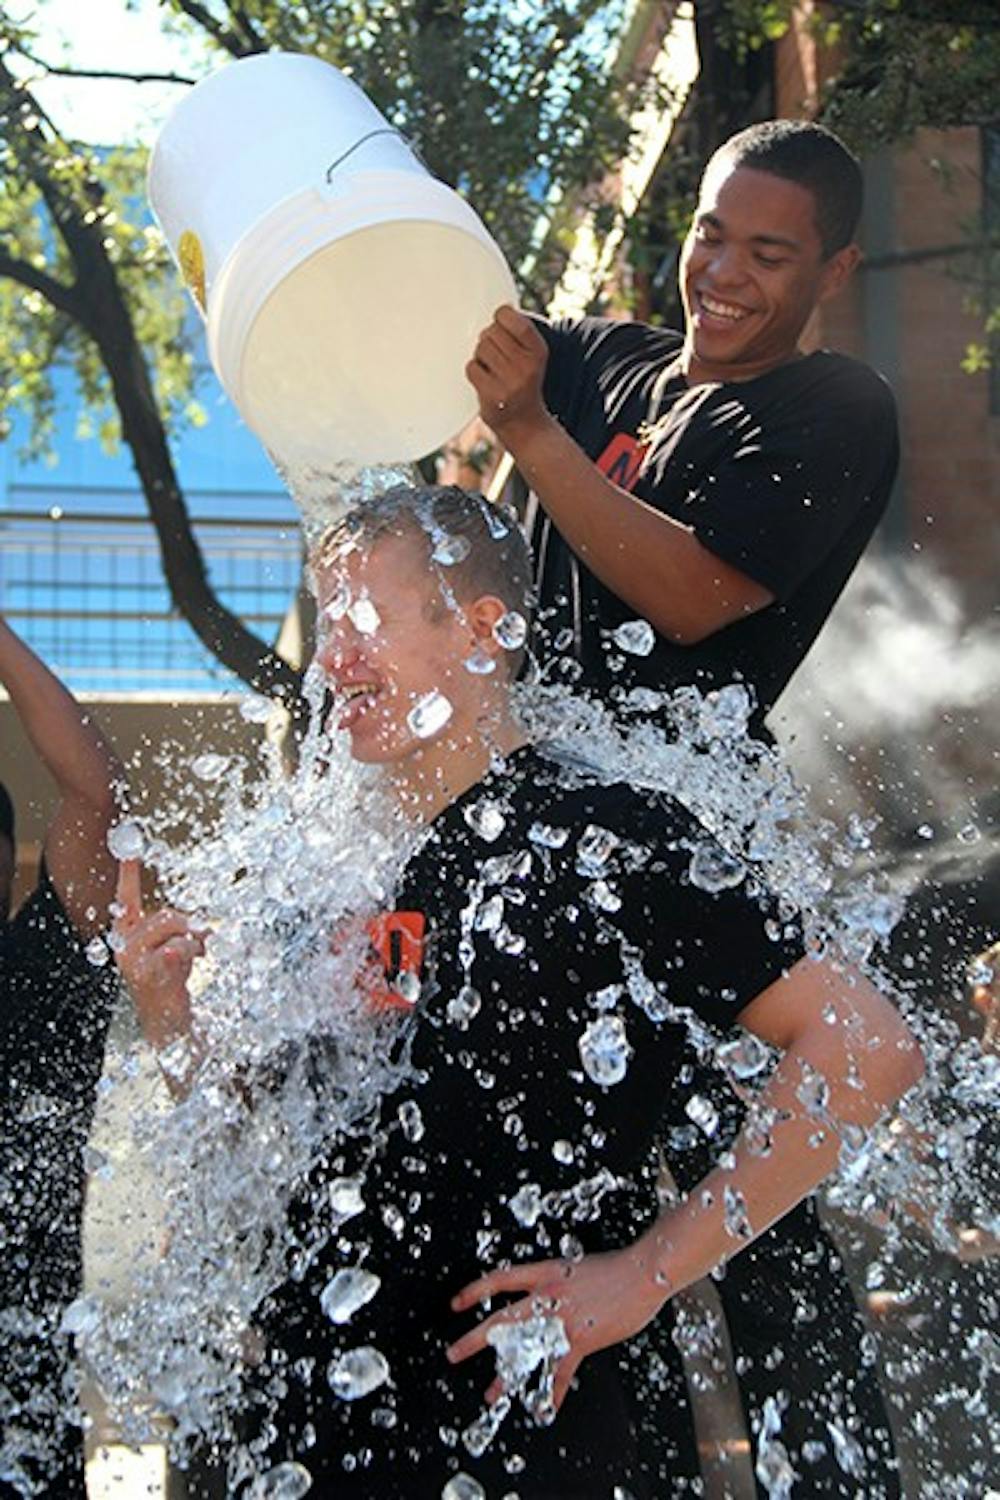 Junior Travis Stroman, along with other Ncounter employees, pours water on Tempe community members on Saturday, Aug. 23 as a part of the ALS Ice Bucket Challenge. Ncounter matched the donations that community members gave at the event. (Photo by Sawyer Hardebeck)